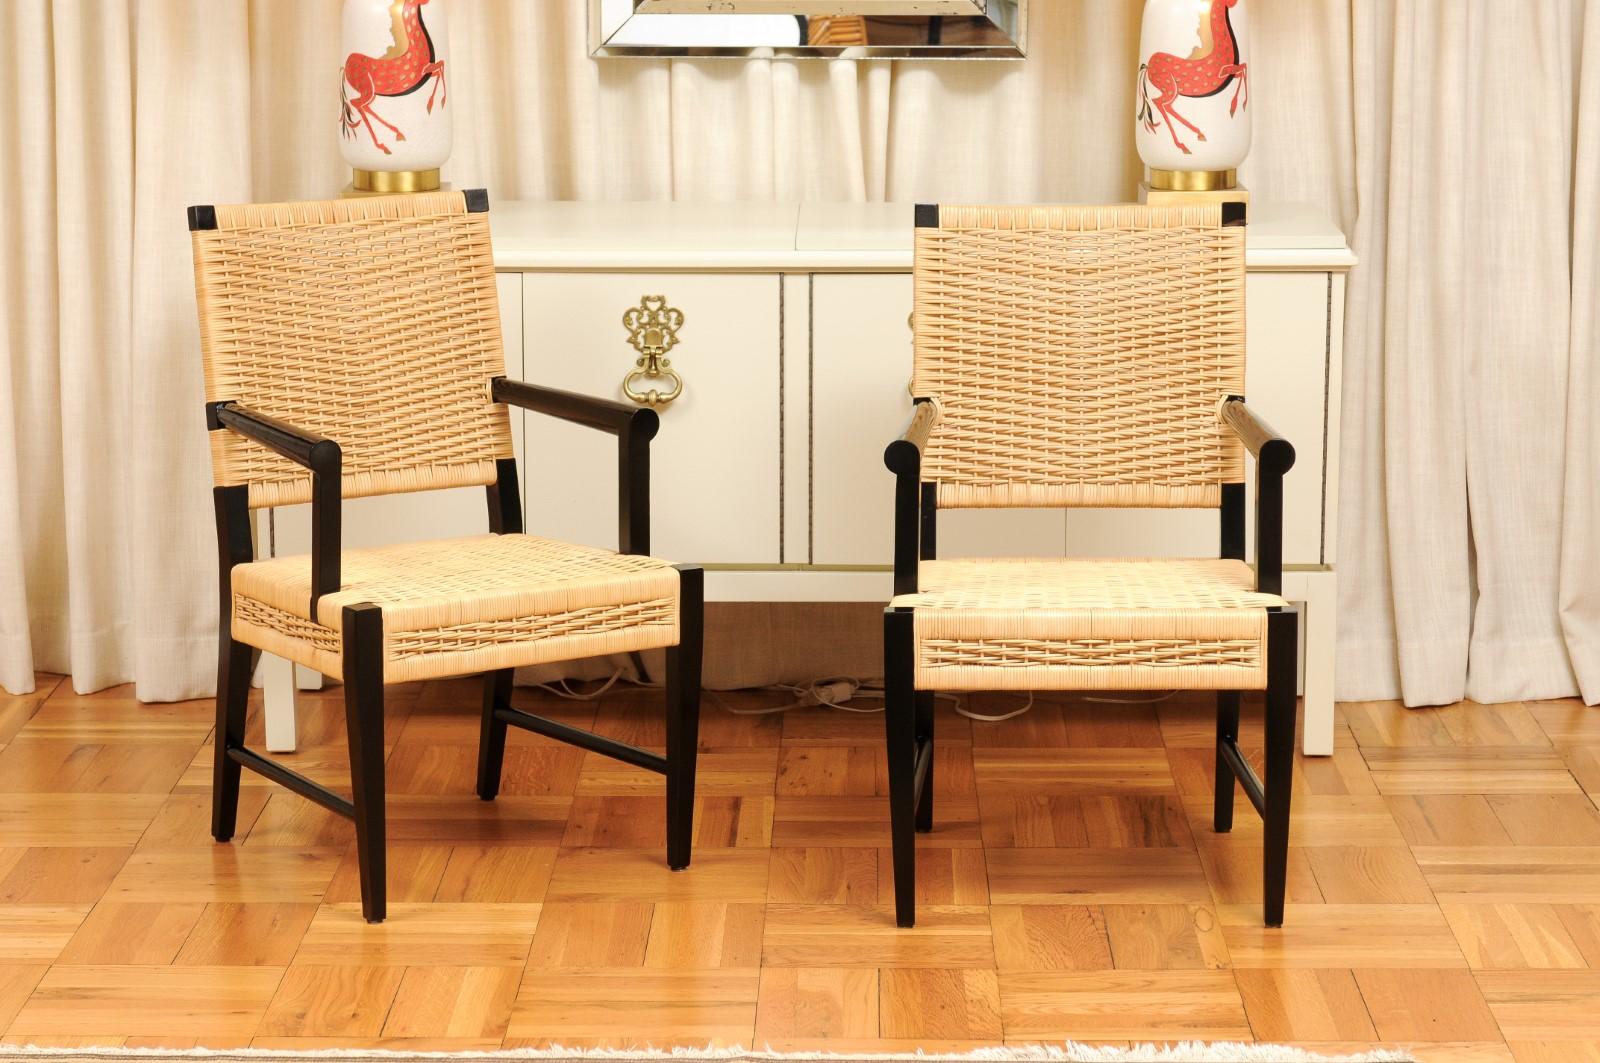 This magnificent set of dining chairs is shipped as professionally photographed and described in the listing narrative: Meticulously professionally restored and completely installation ready. Expert custom upholstery service is available. This large